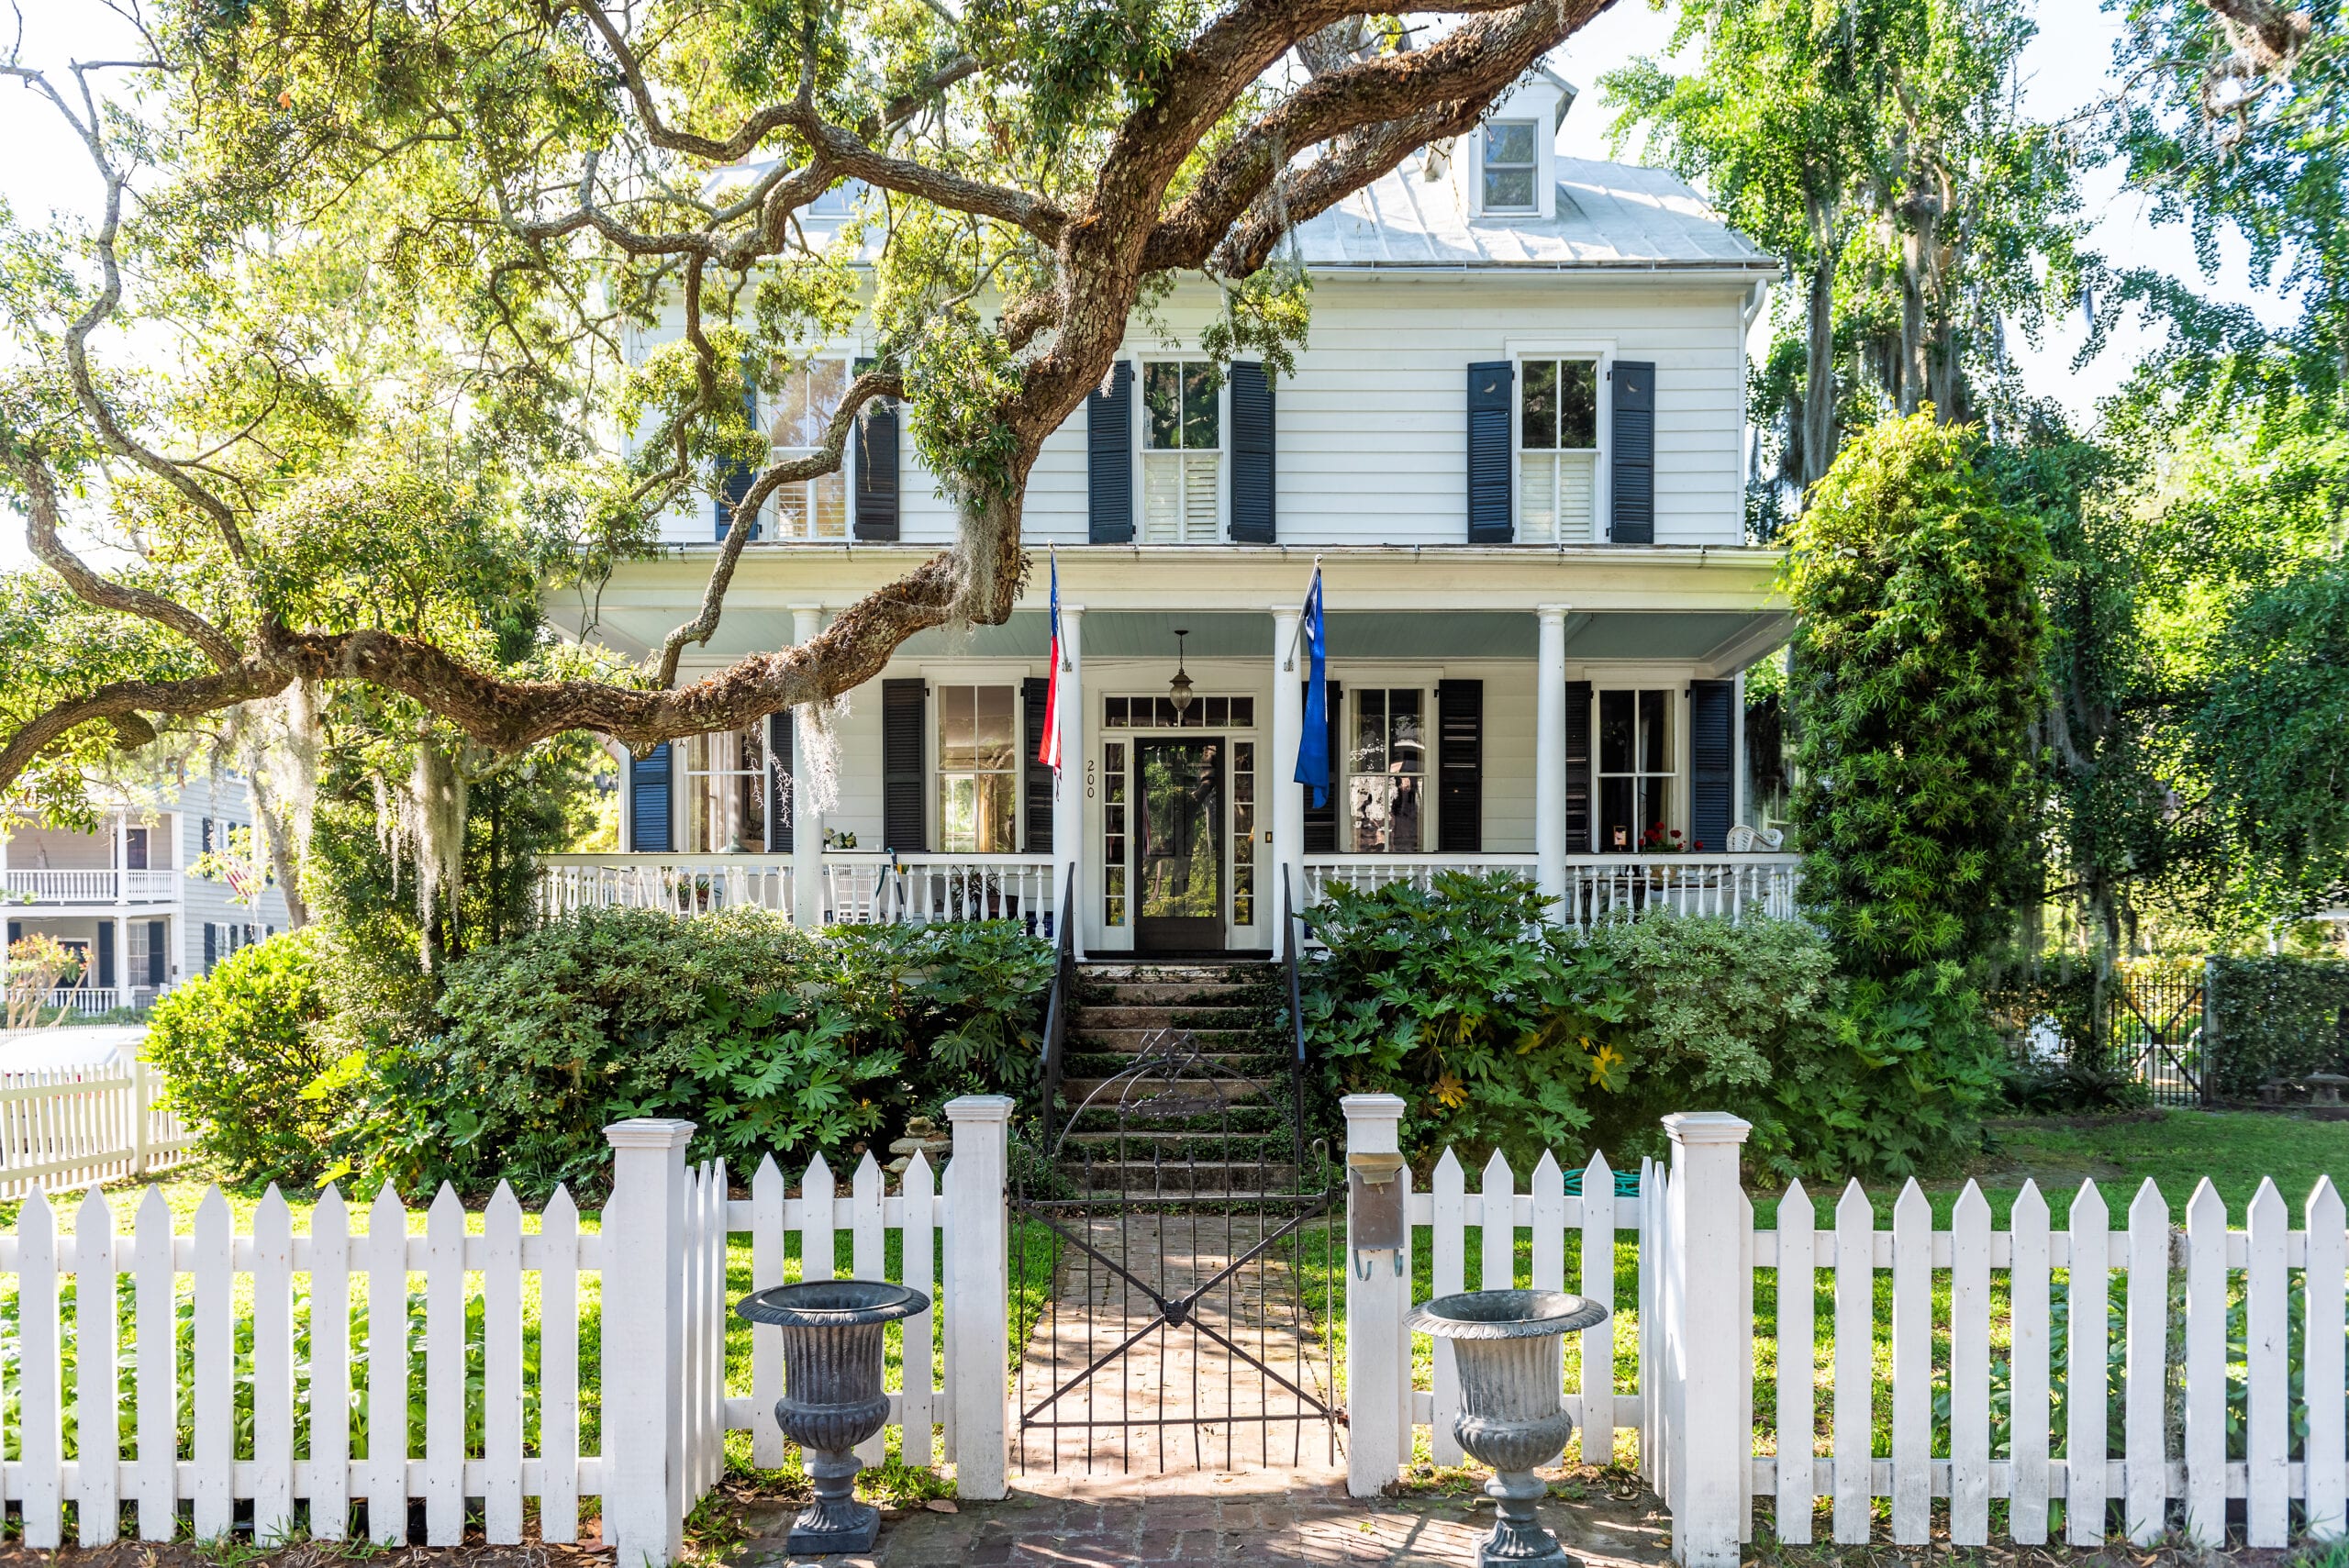 Mount Pleasant, USA - May 11, 2018: Typical American residential house building in Charleston, South Carolina area with American flag and white picket fence